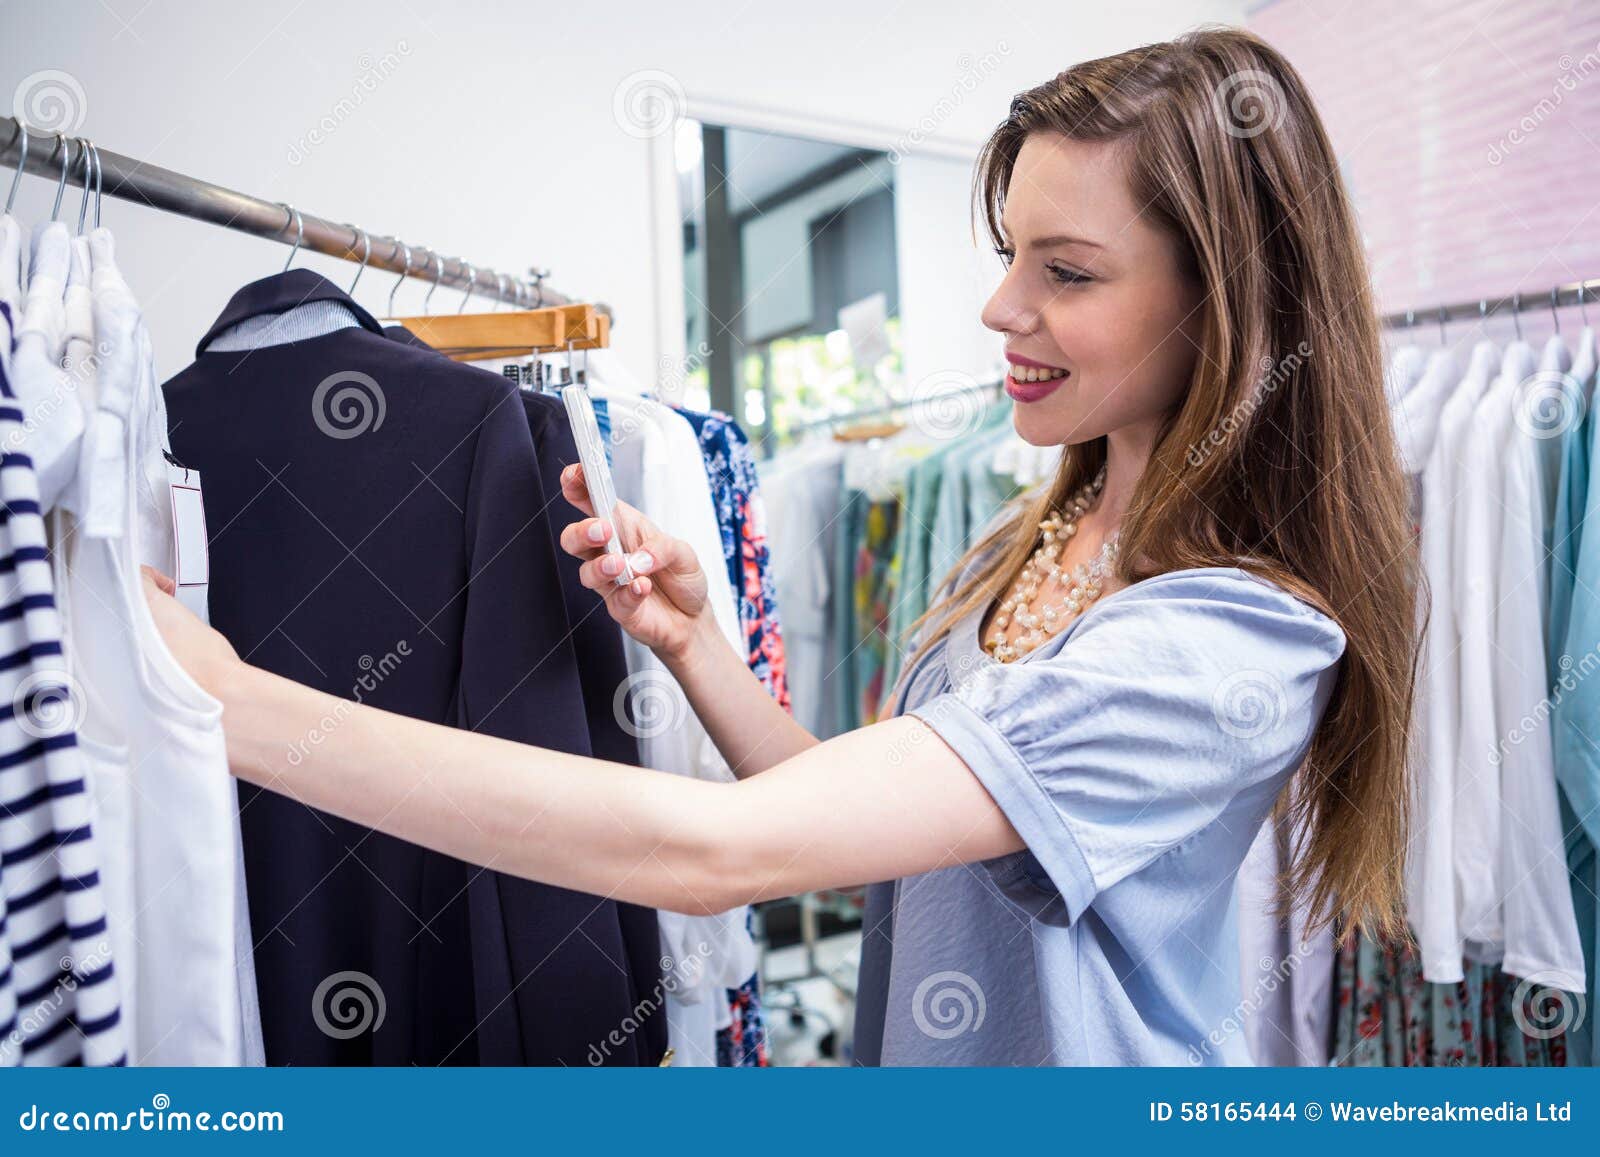 Woman Taking a Photo of Price Tag Stock Photo - Image of pretty, female ...